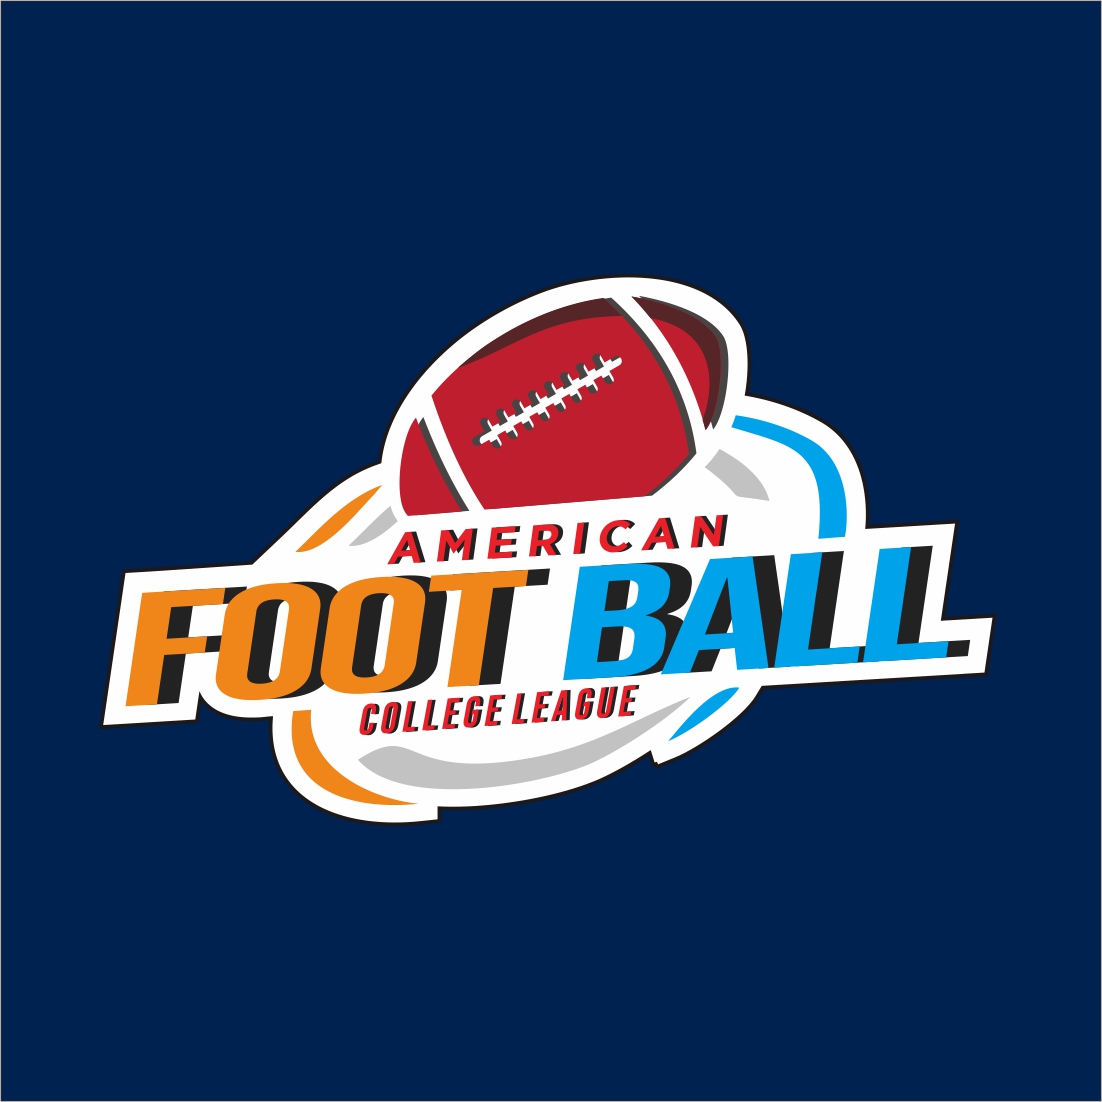 American Football Sports logos and badges, logo template preview image.